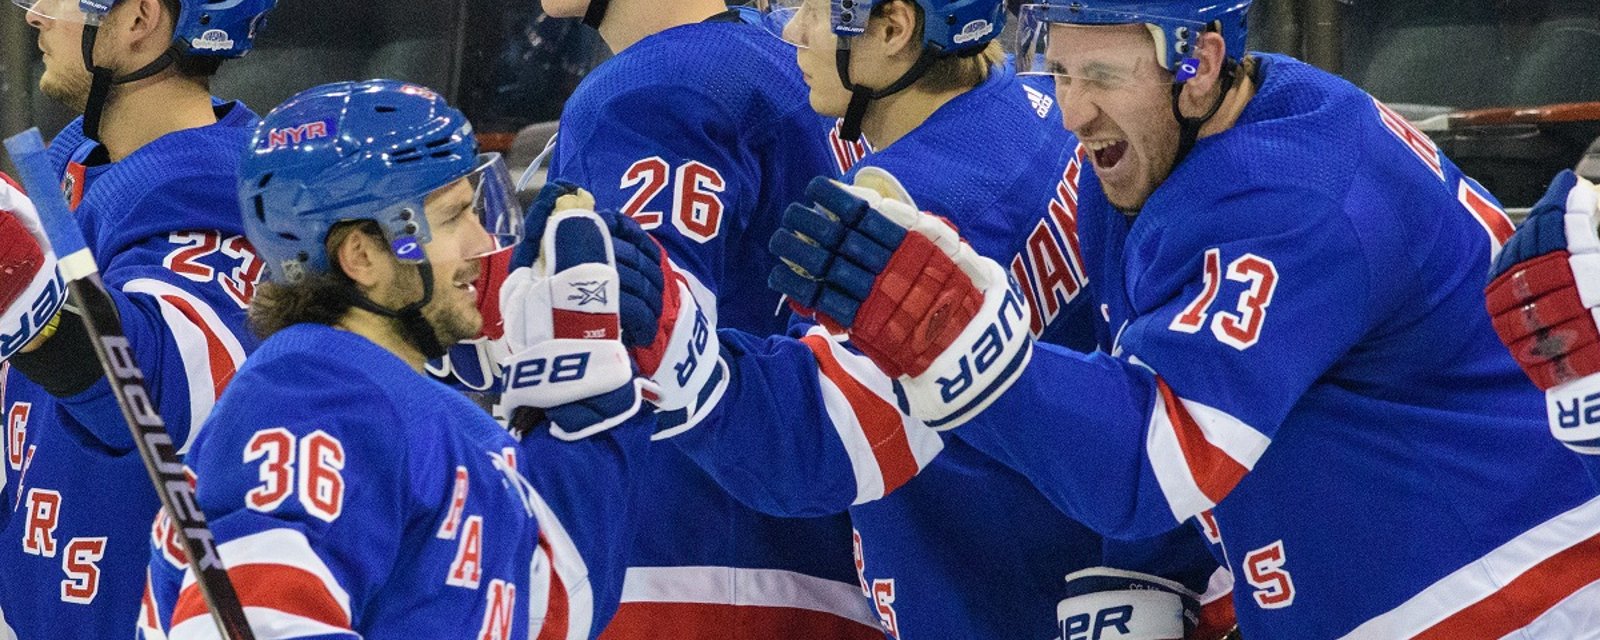 Rangers have benched 3 players heavily linked to trade rumors.